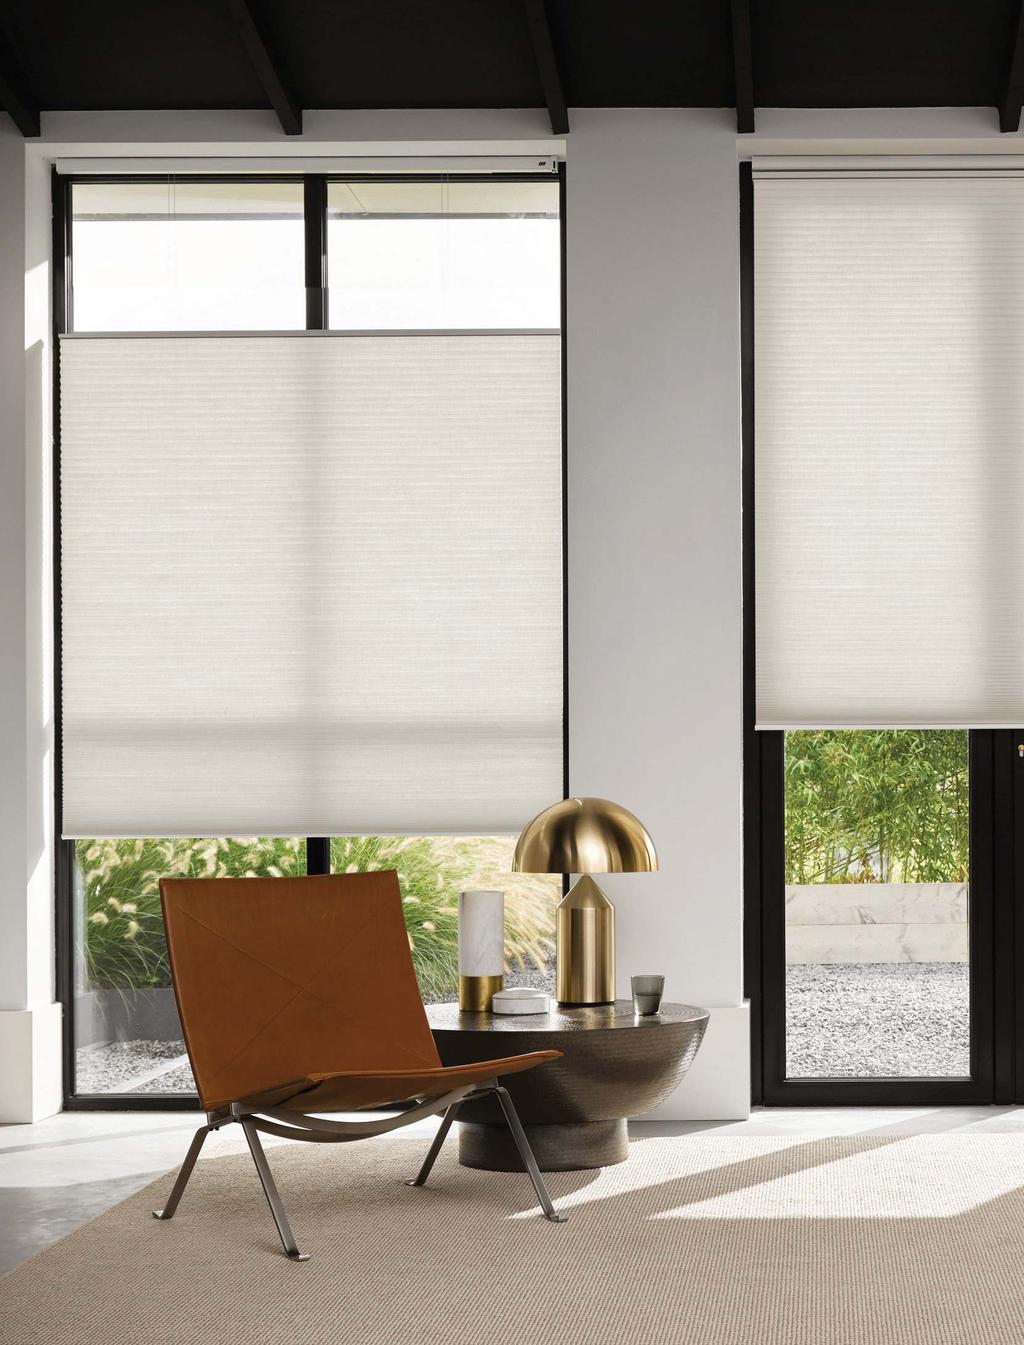 Each of our blinds is made to measure to your exact requirements, and we take our time helping you choose from